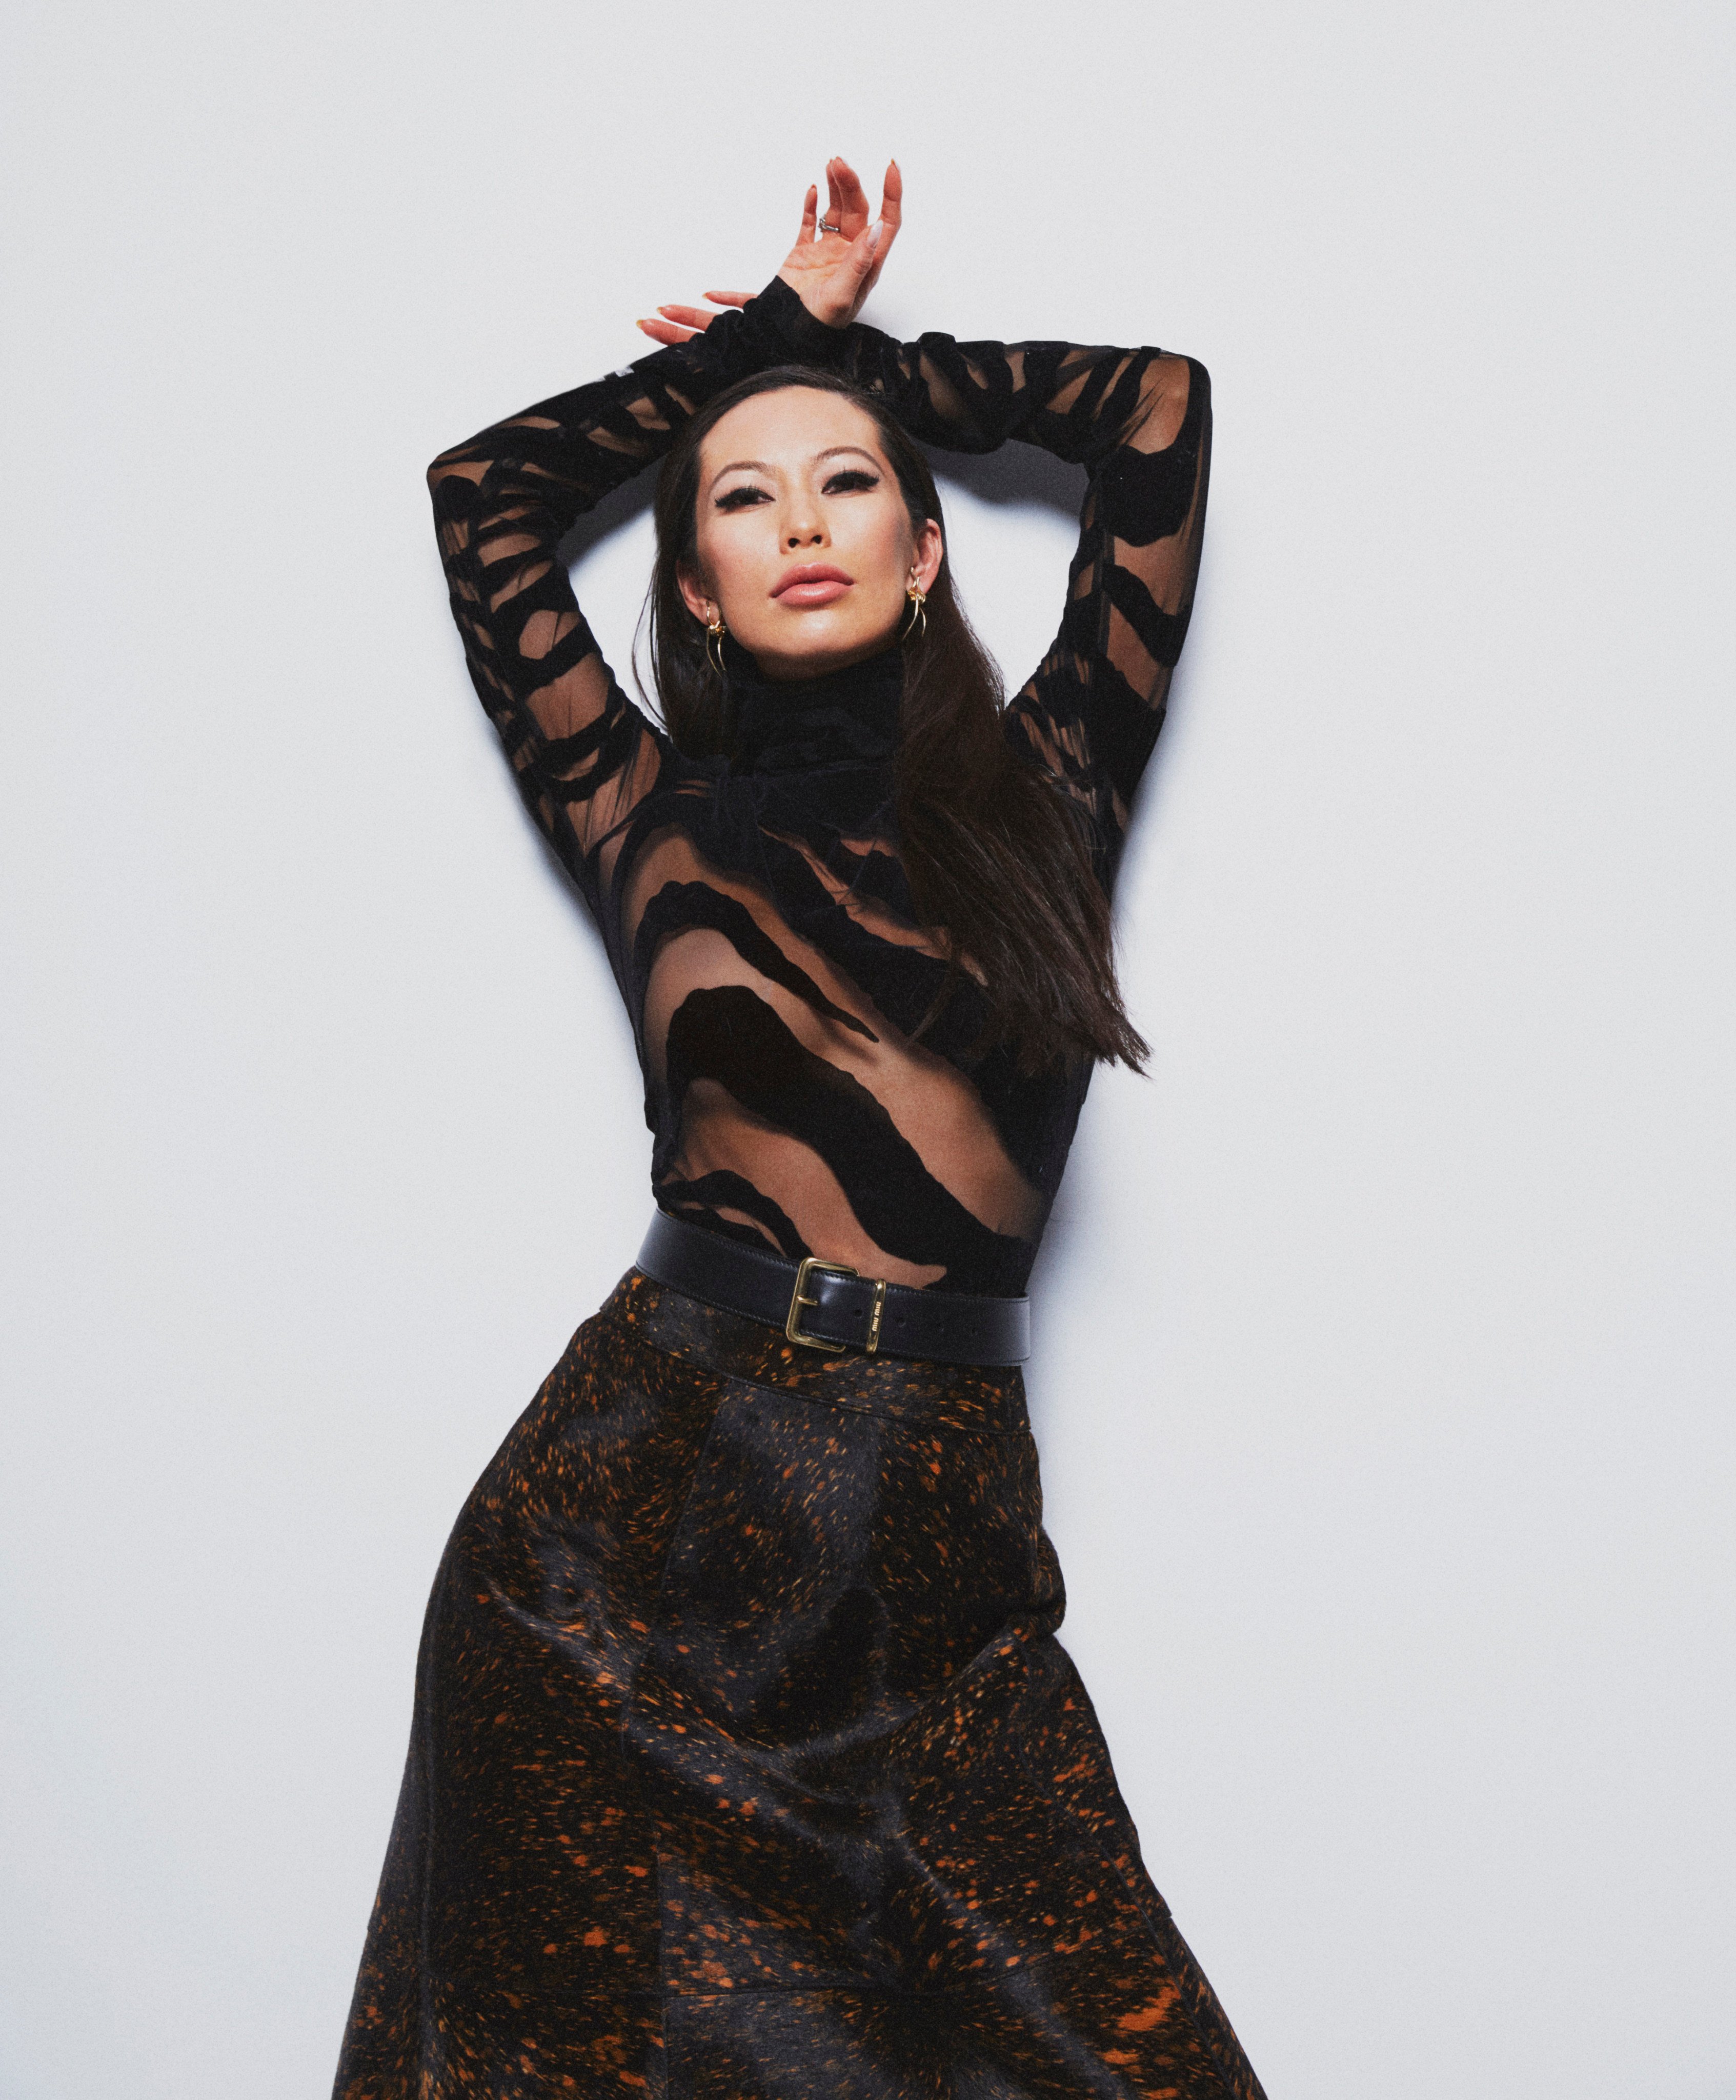 STYLE speaks explosively to Christine Chiu, one of the breakout stars from Netflix’s Bling Empire. Photo: Handout